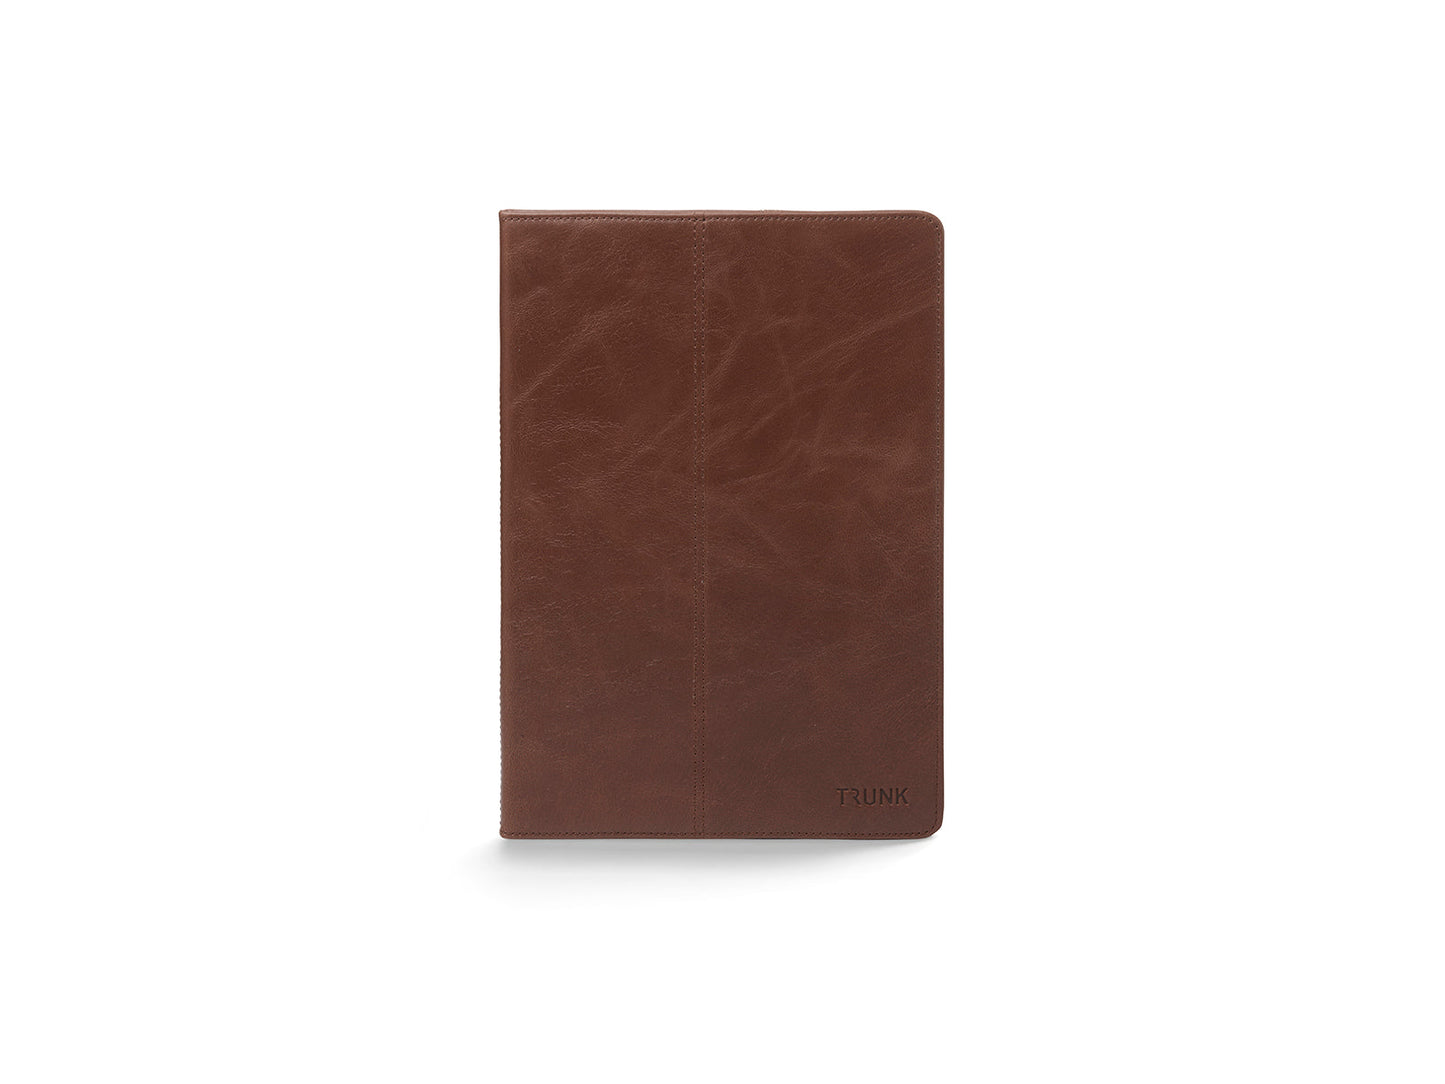 Trunk iPad Air cover 10,9" Leather Brun